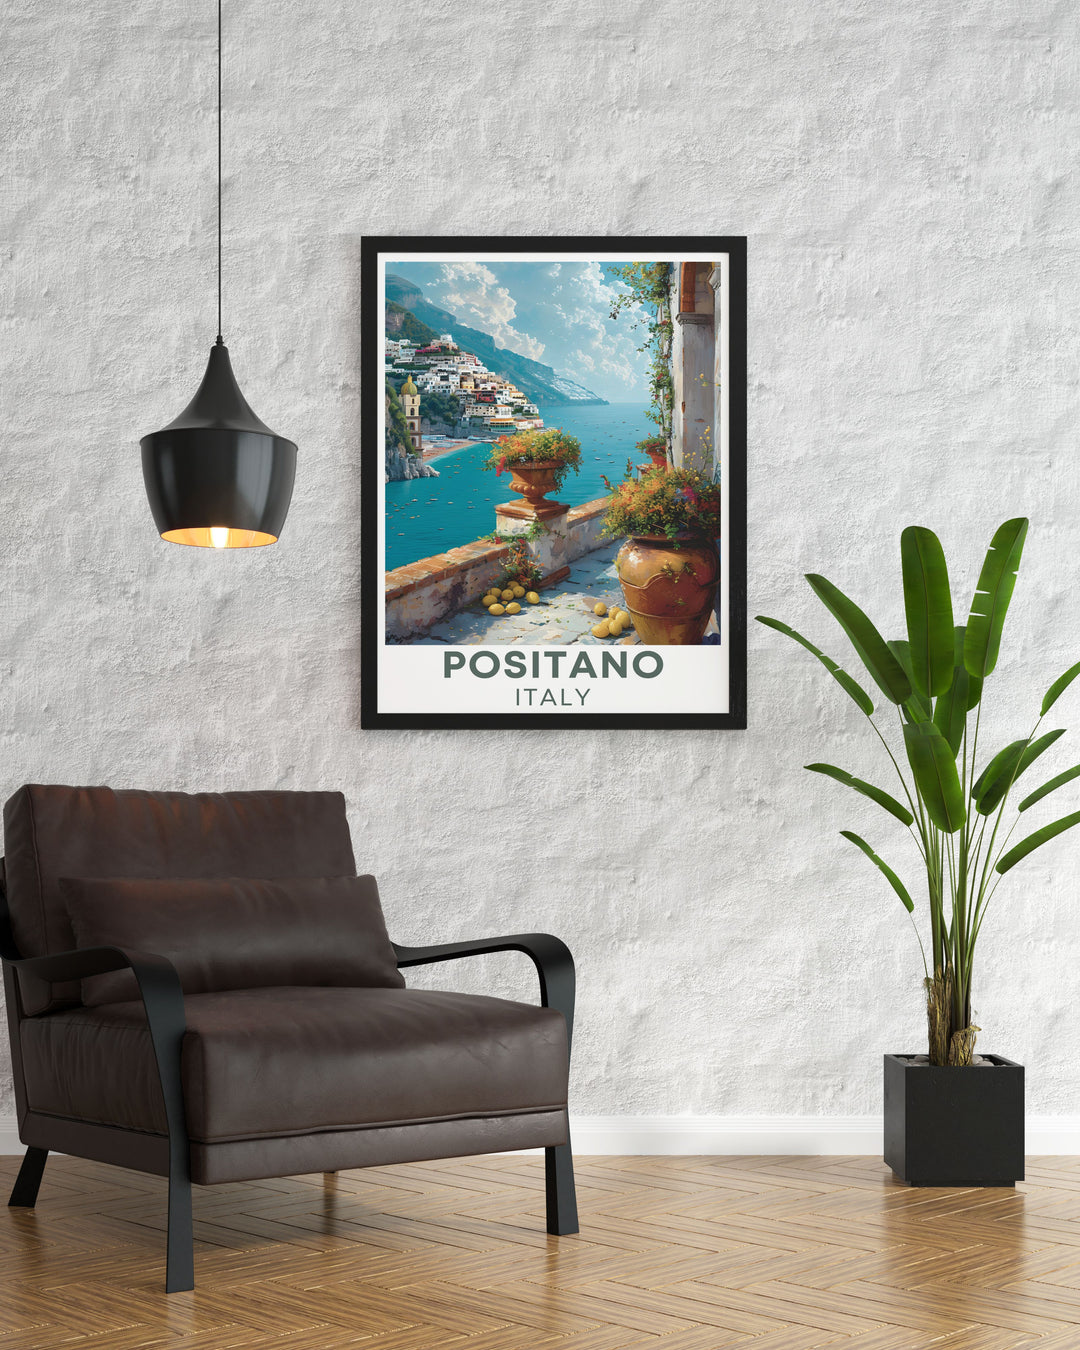 Transform your living space with this Positano Wall Art featuring Via Positanesi dAmerica, a captivating print that brings the beauty of the Amalfi Coast to your home, ideal for Italy lovers and home decor enthusiasts.